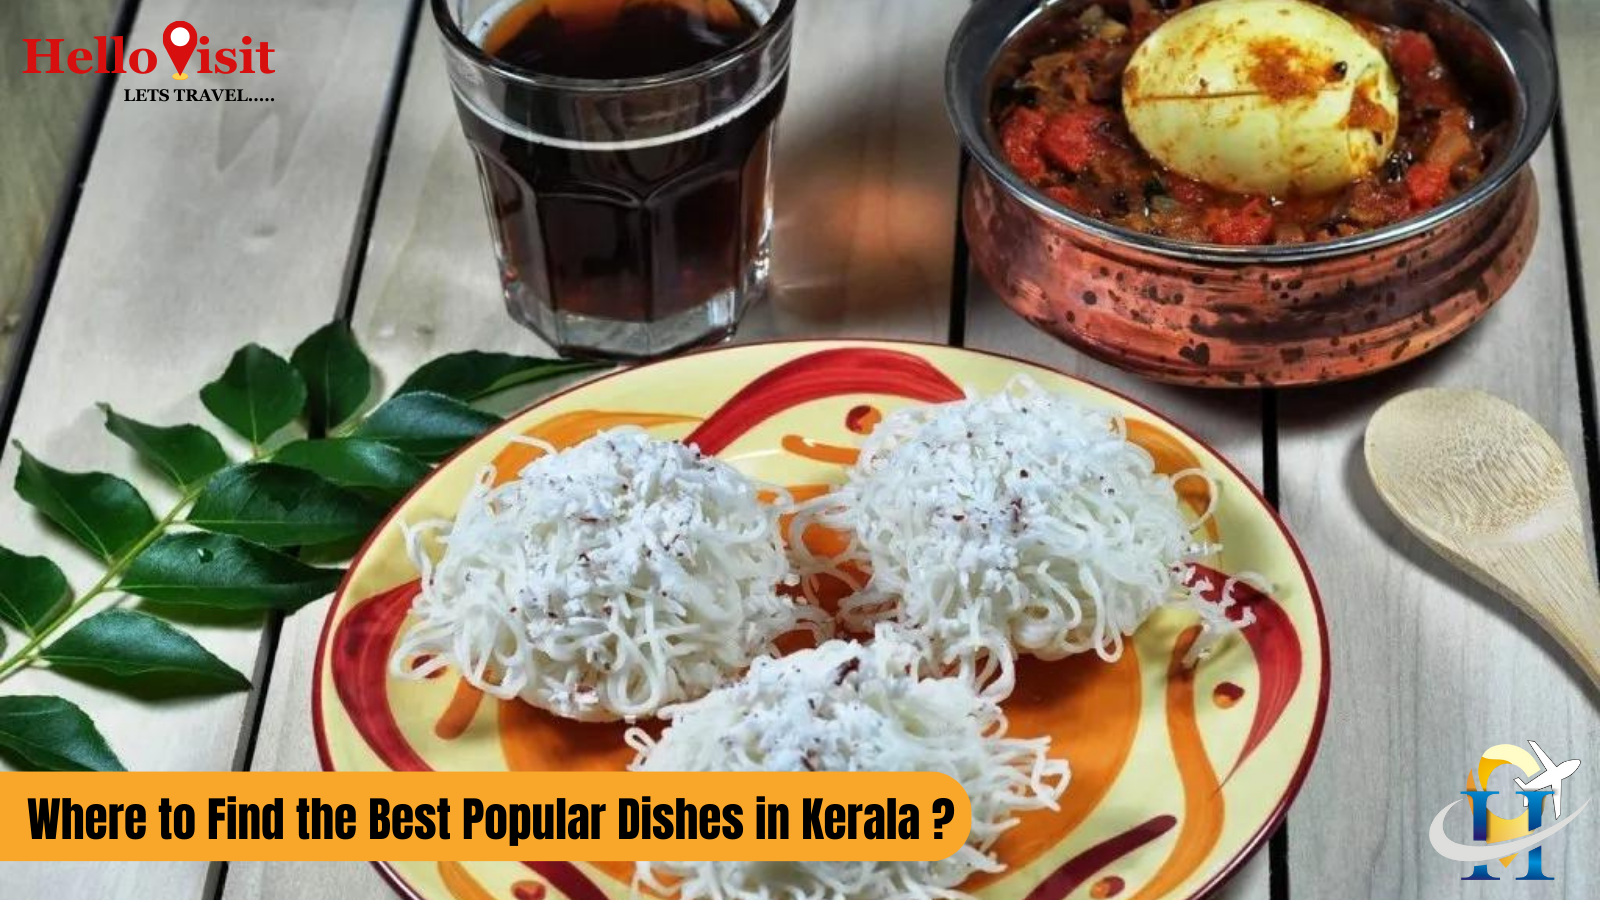 Where to Find the Best Popular Dishes in Kerala?